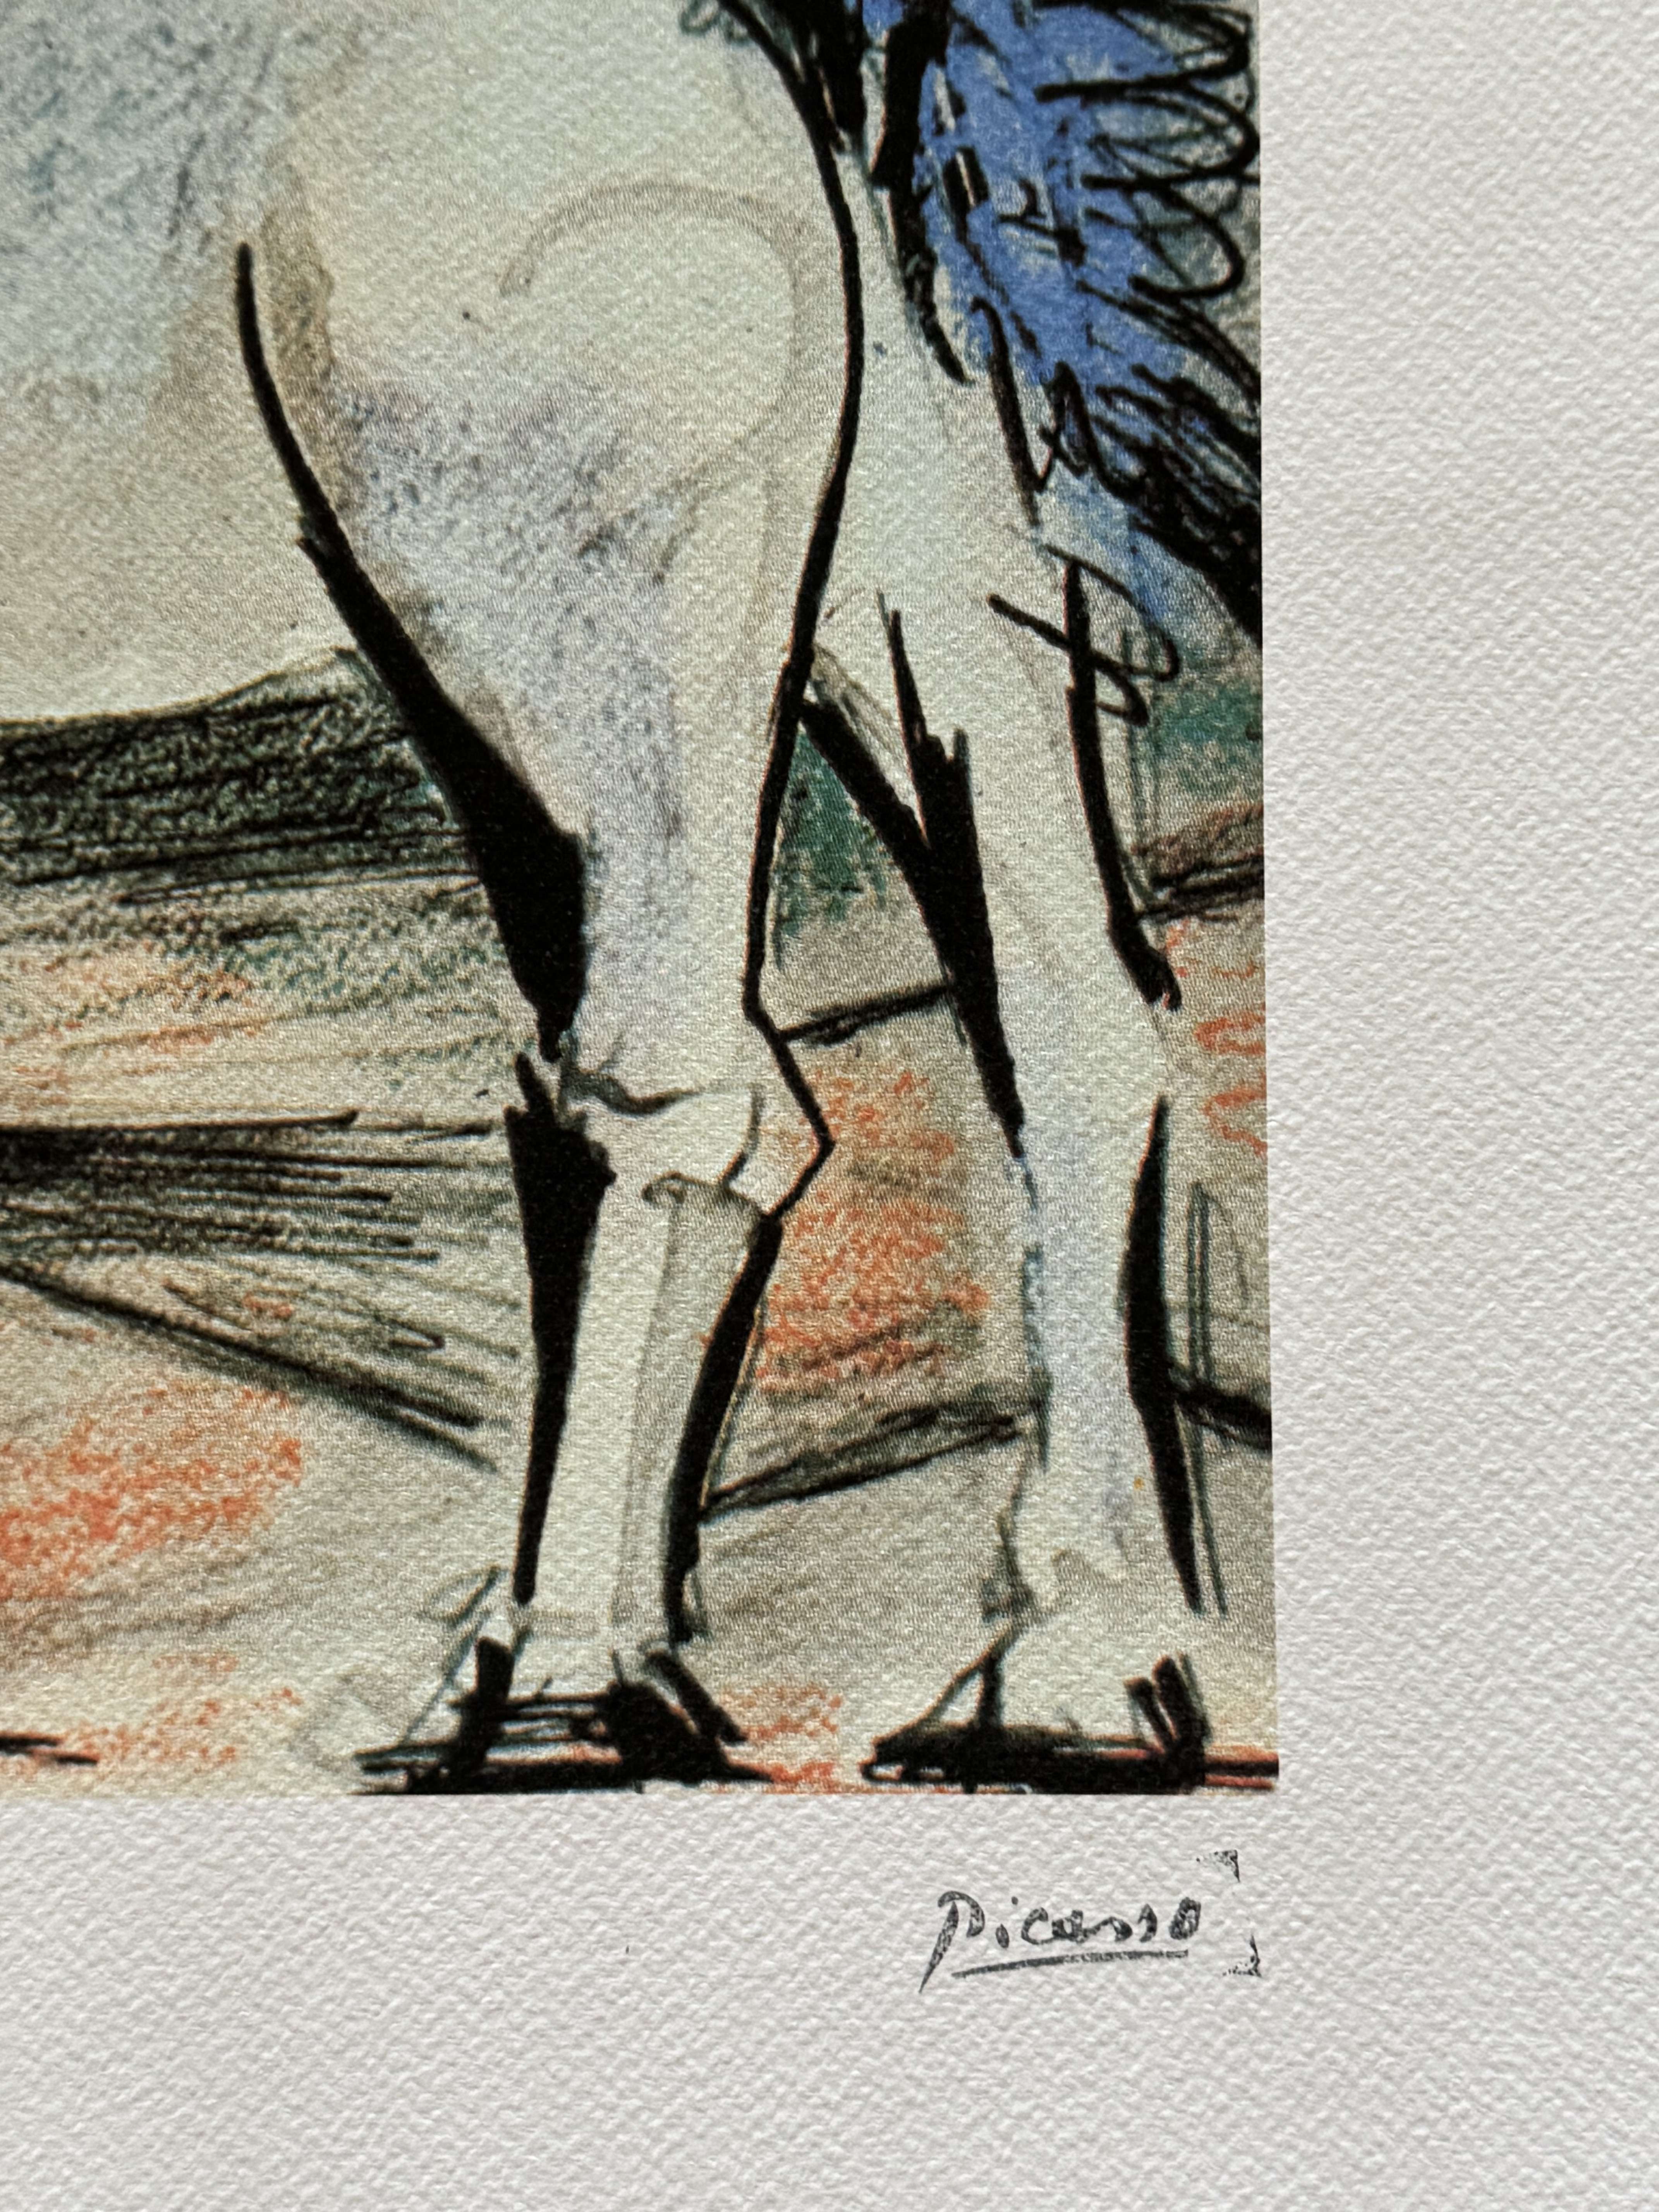 Pablo Picasso horse offset lithograph plate signed hand numbered - Image 2 of 4